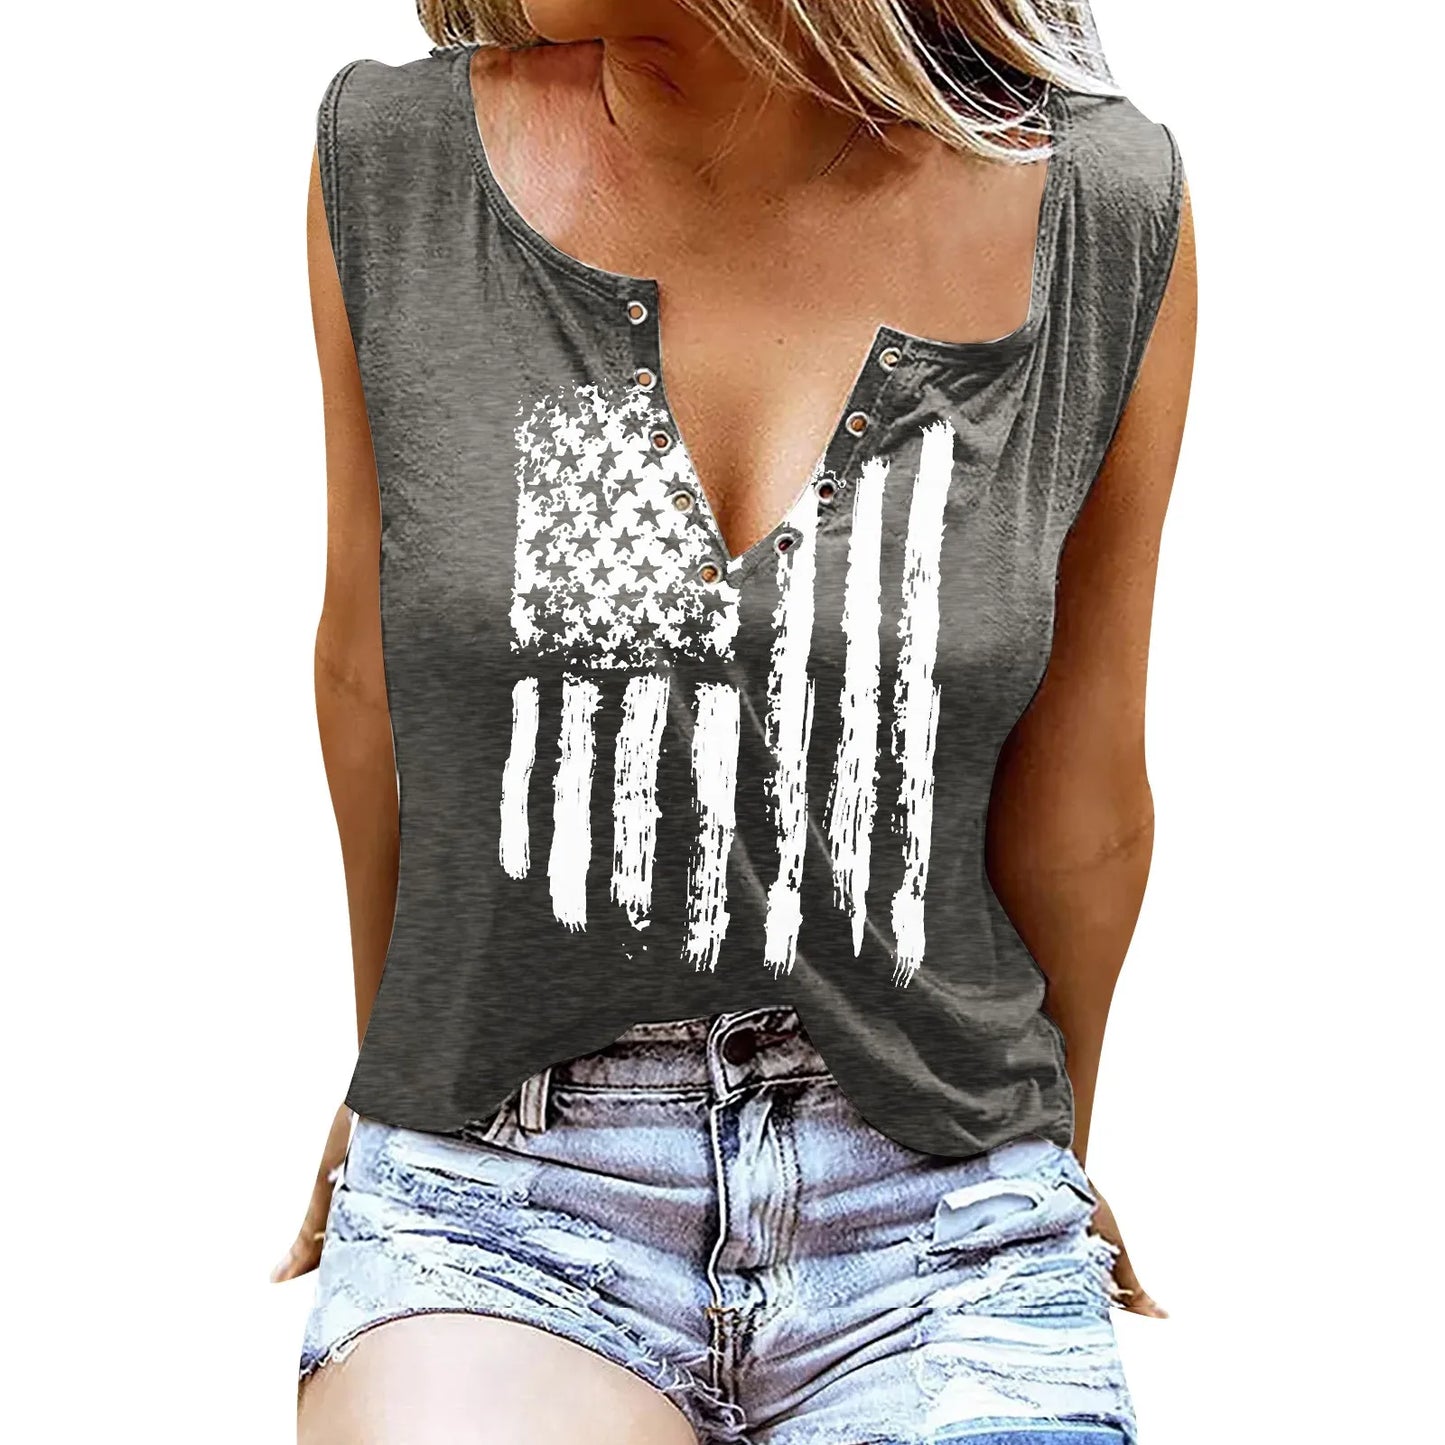 Women's American Flag Print Tank Top For 4th Of July Shirts Button V-neck Sleeveless T-shirt Summer Casual Patriotic Shirt Tops